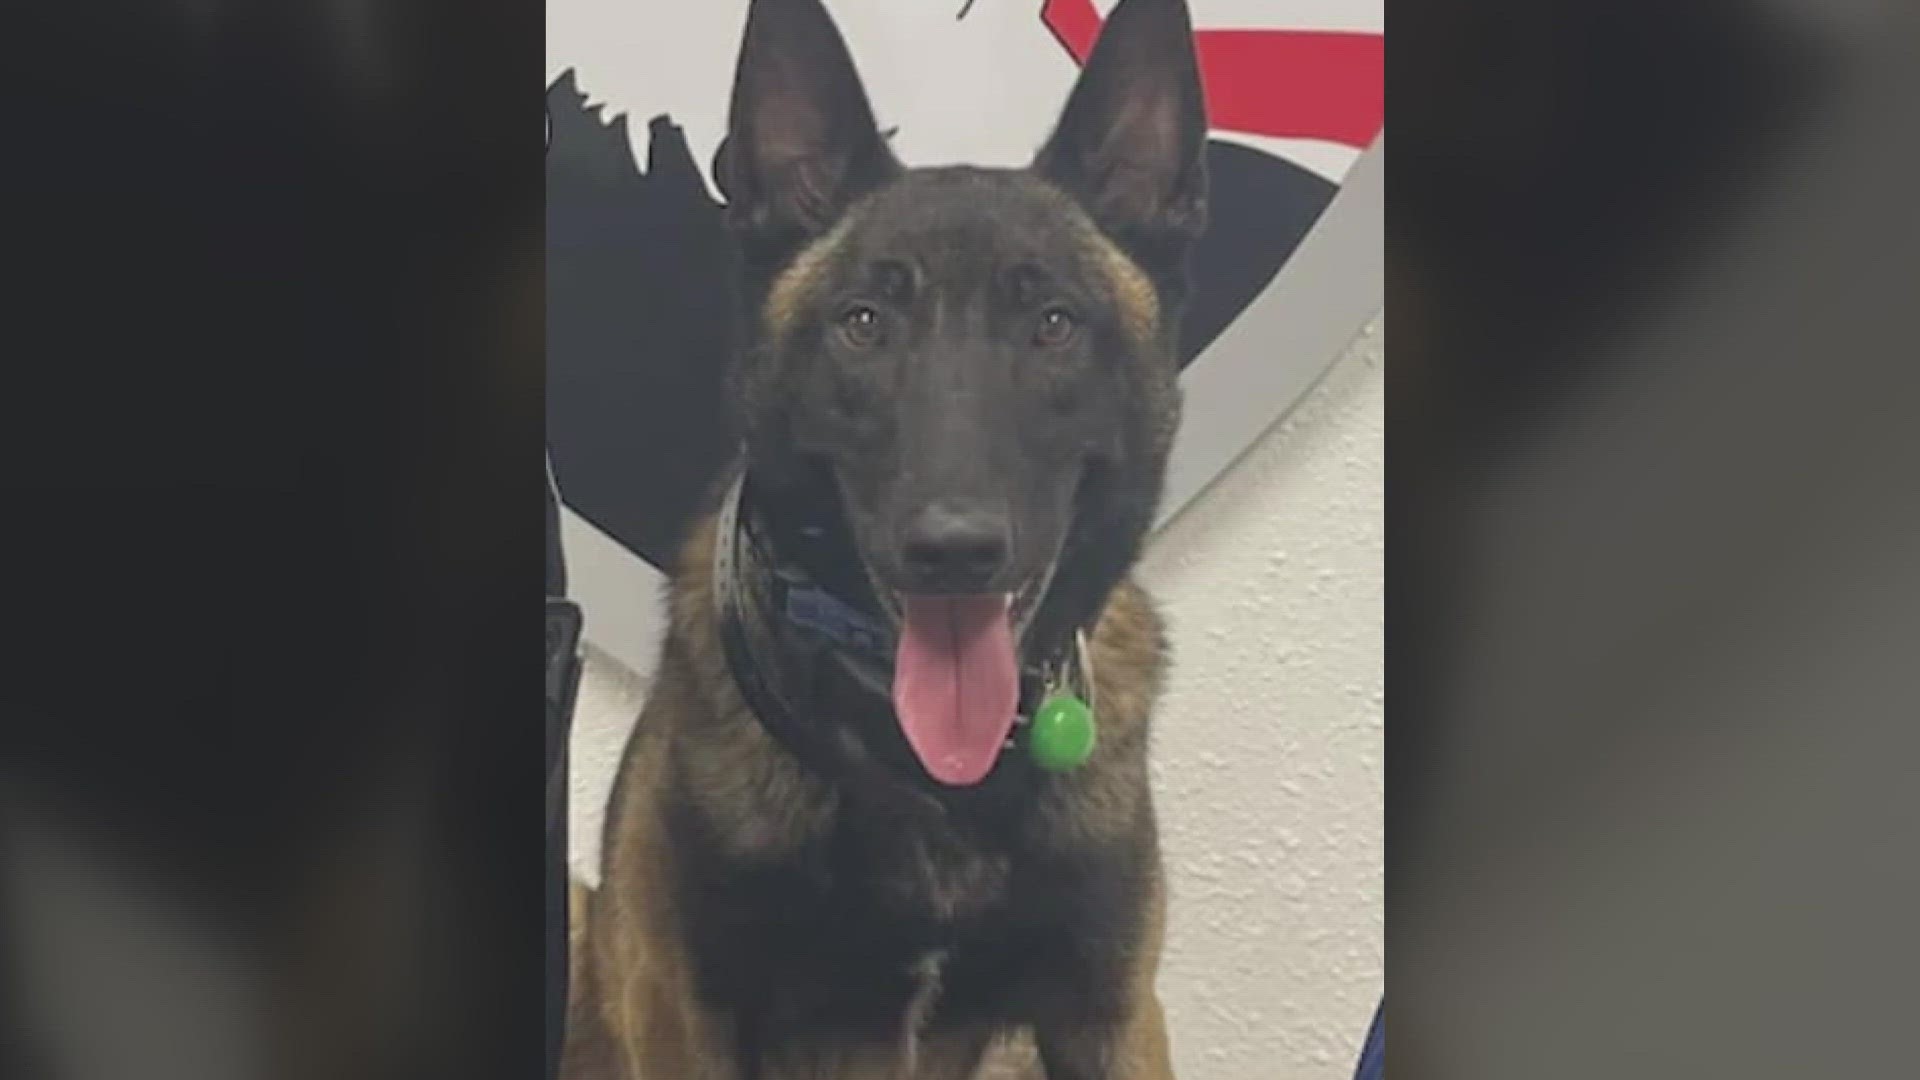 People in a central Illinois community are concerned Tuesday night after a K-9 officer died. The officer was on the job for just over a year.